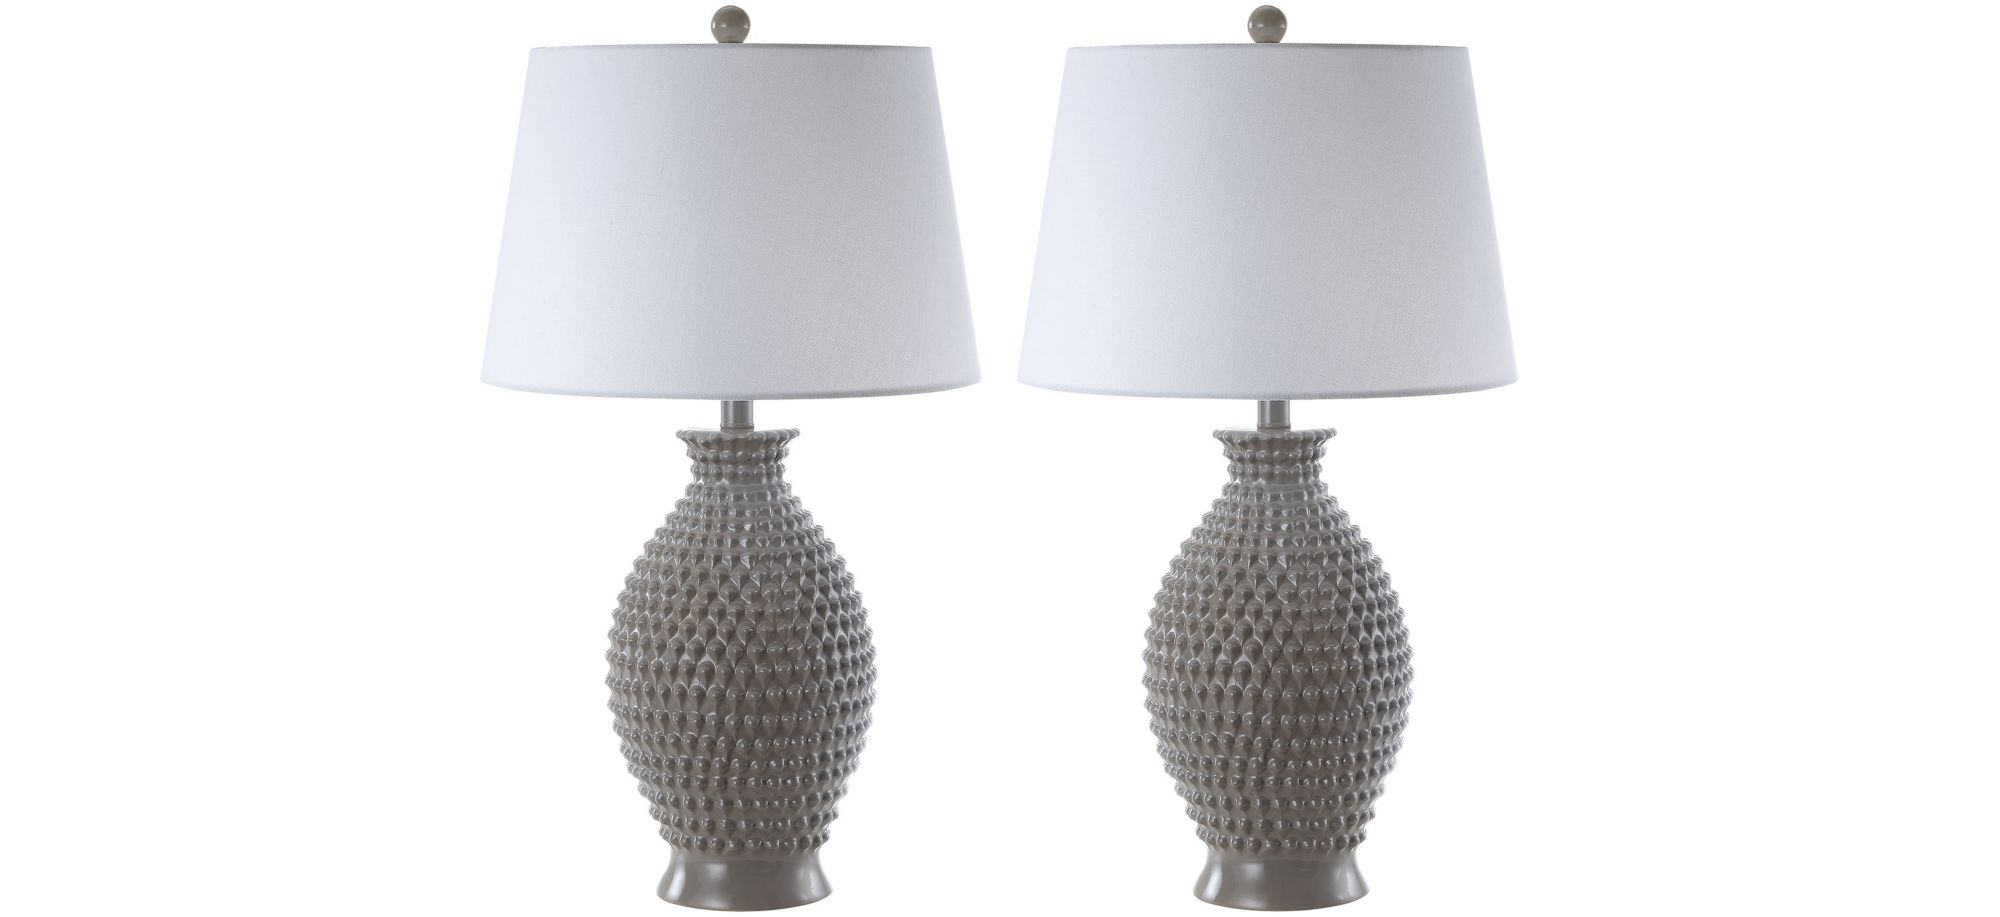 Minton Table Lamp Set in Gray by Safavieh